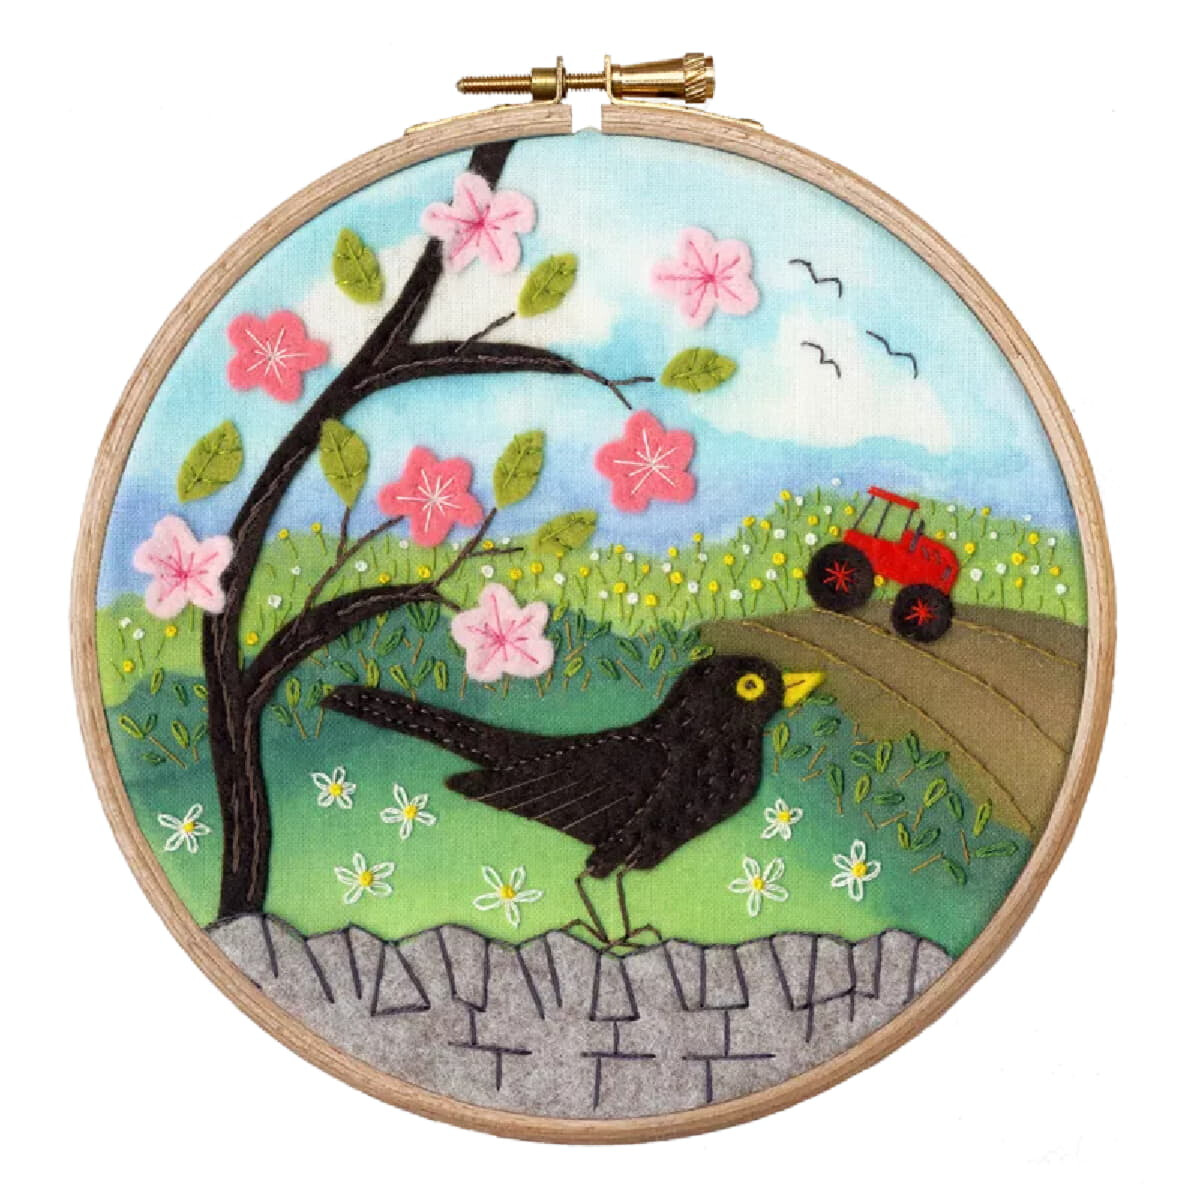 An embroidery hoop shows a lively landscape scene with a...